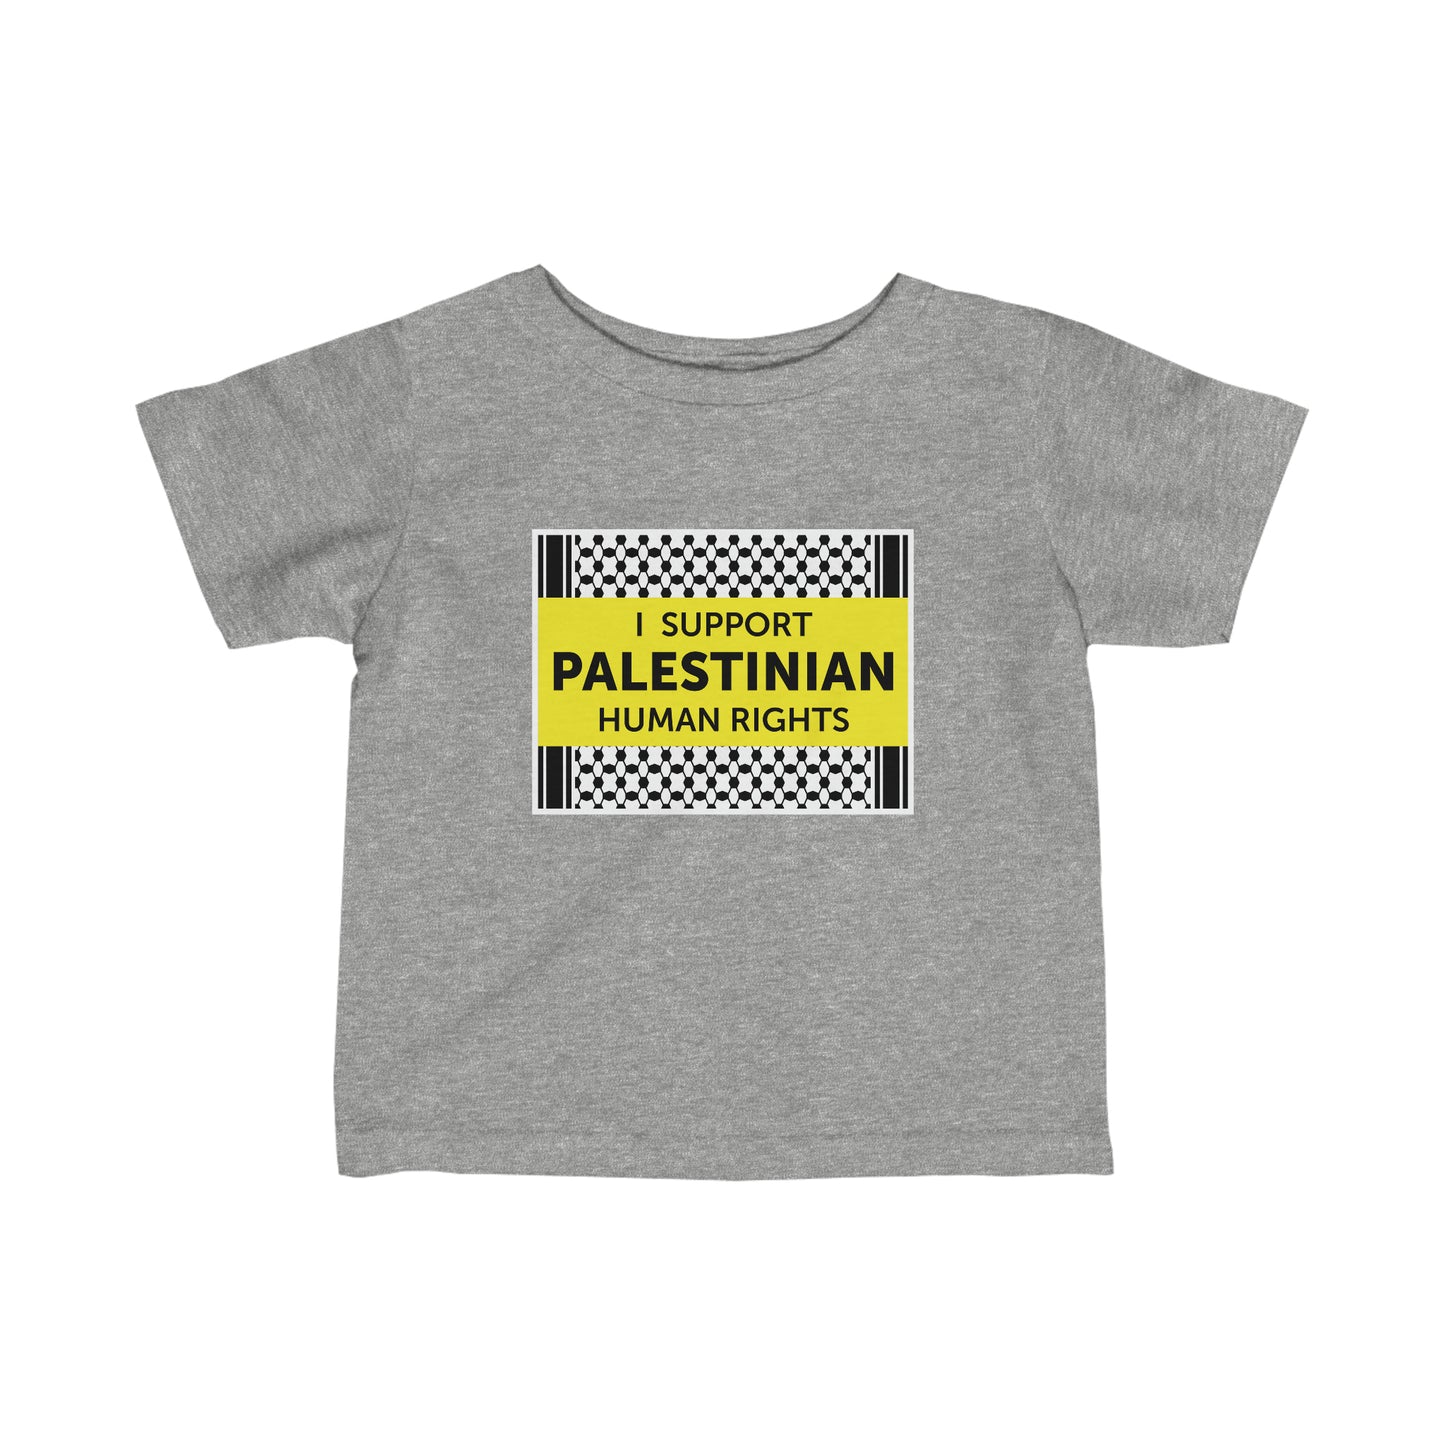 “I Support Palestinian Human Rights” Infant Tee